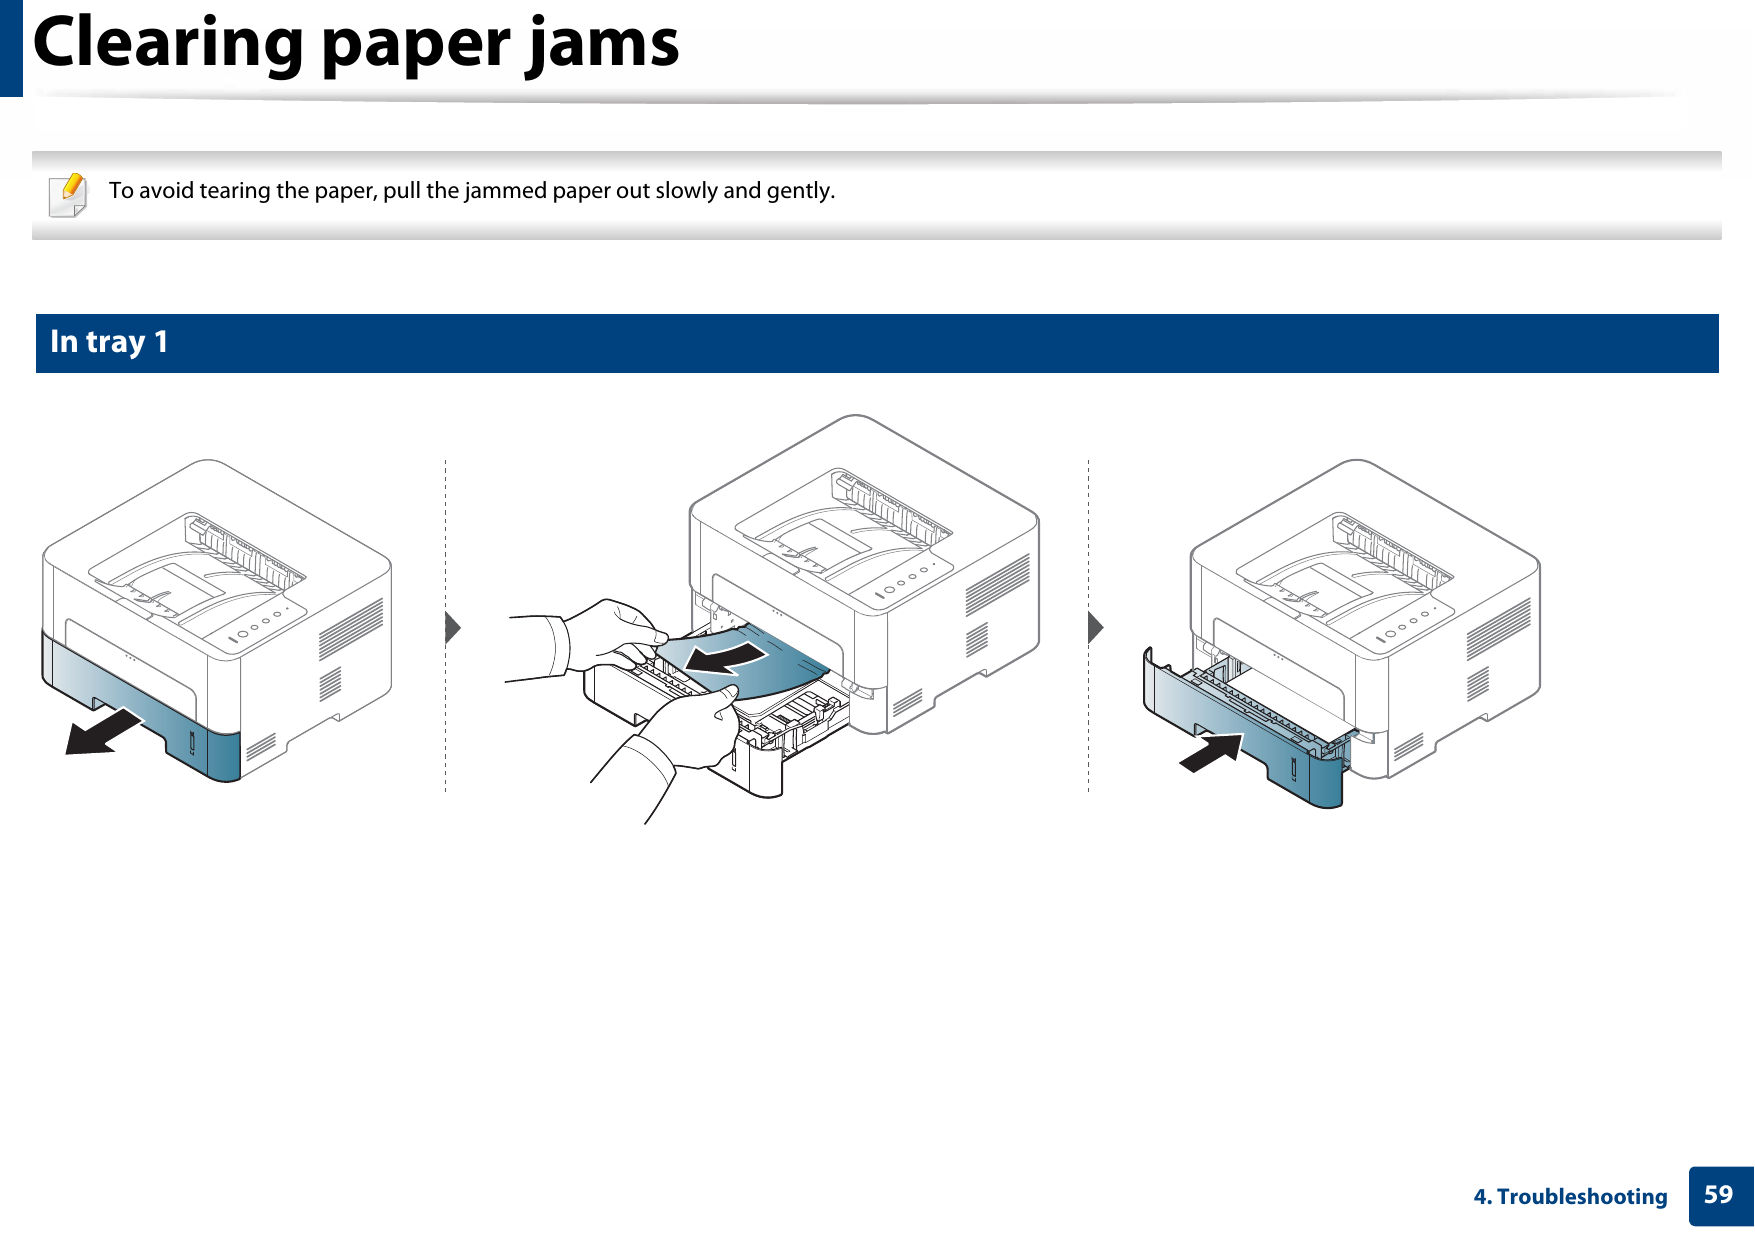 594. TroubleshootingClearing paper jams To avoid tearing the paper, pull the jammed paper out slowly and gently.  1 In tray 1